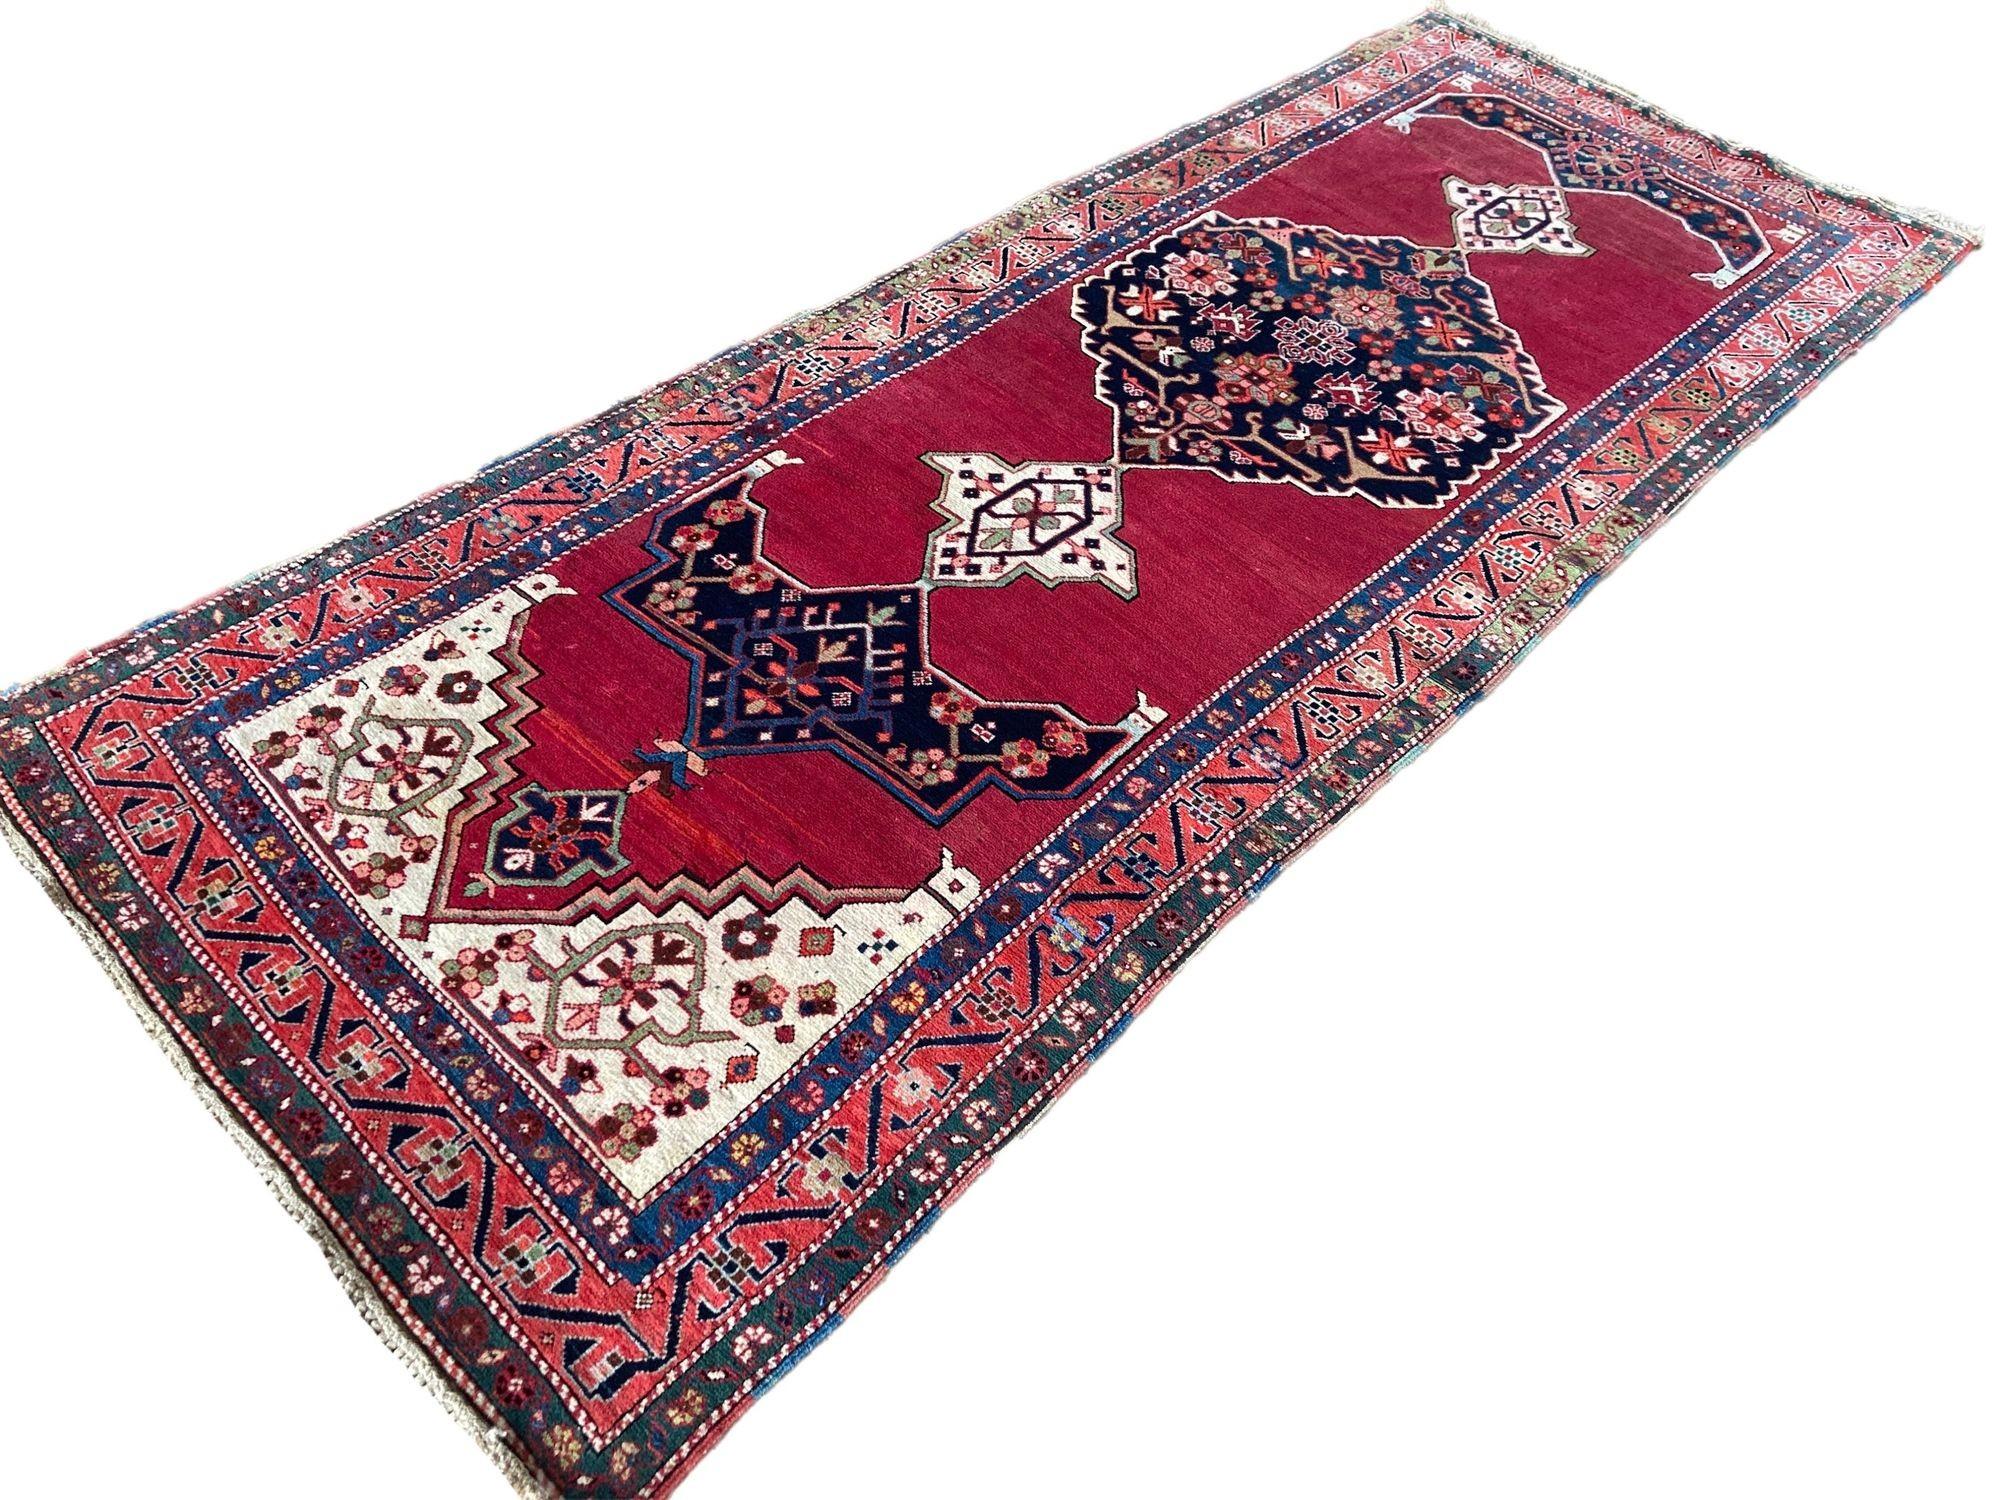 Antique Karabagh Long Rug 2.97m x 1.17m In Good Condition For Sale In St. Albans, GB